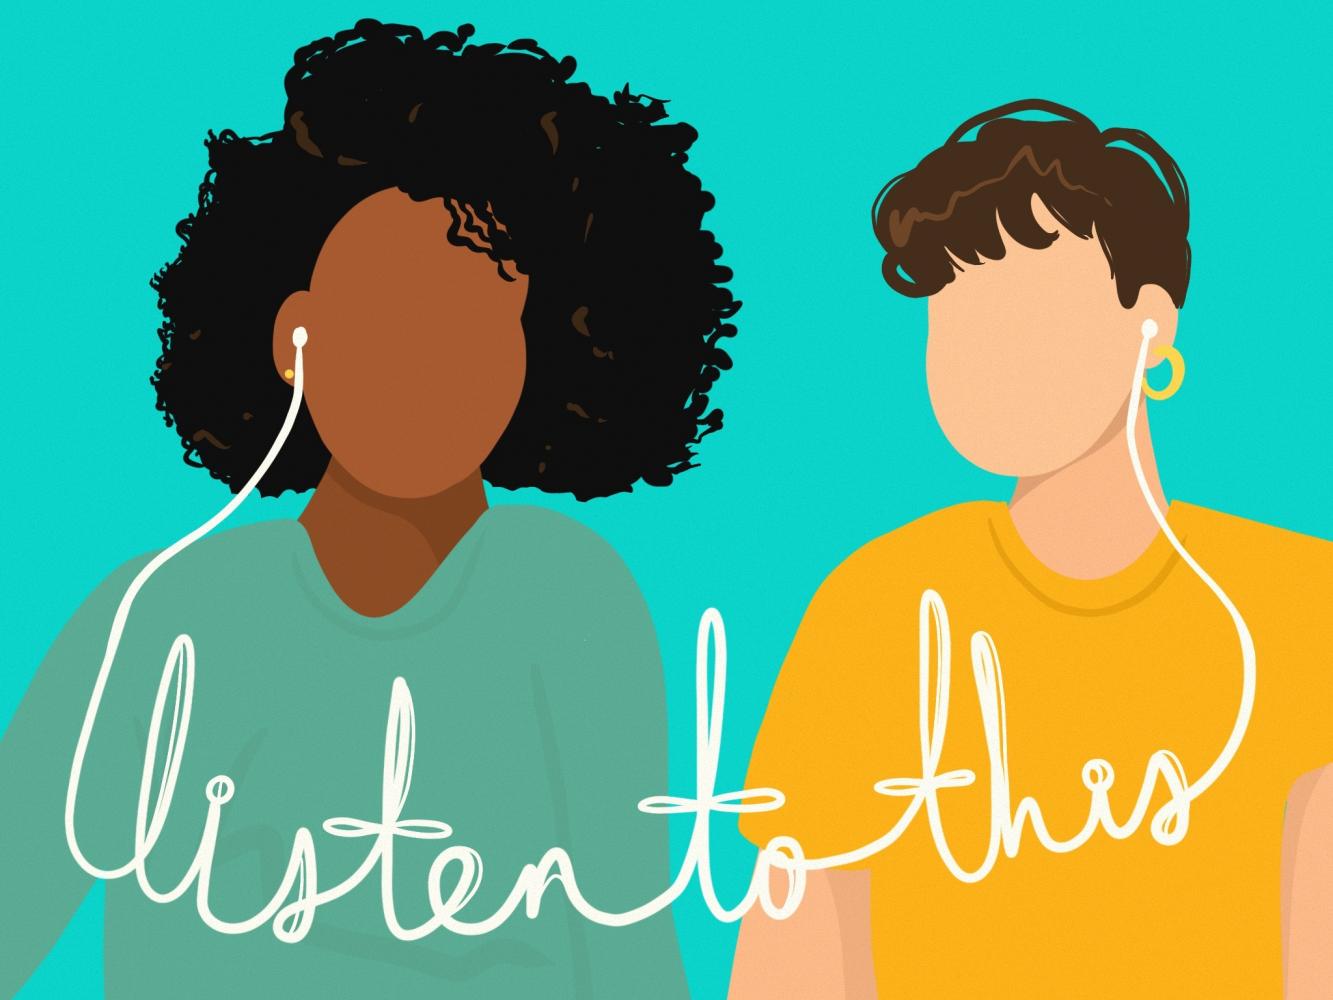 An illustration of a Black woman in a green shirt and a white woman in a yellow shirt listening to music through wired headphones. The cord of the headphones spells out “Listen to This.”